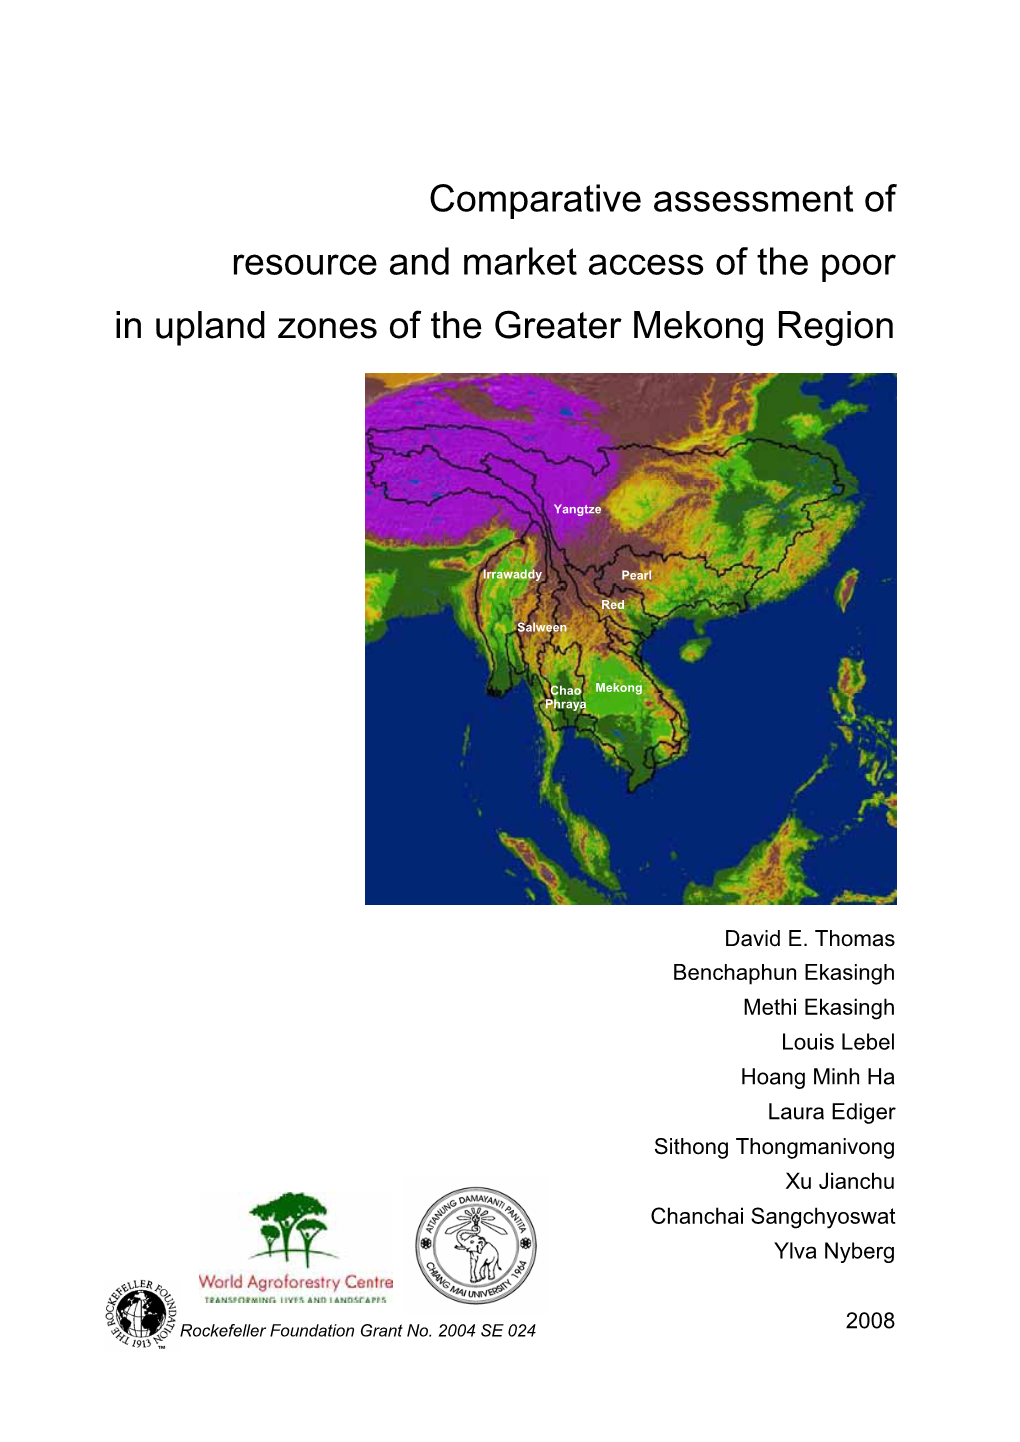 Comparative Assessment of Resource and Market Access of the Poor in Upland Zones of the Greater Mekong Region